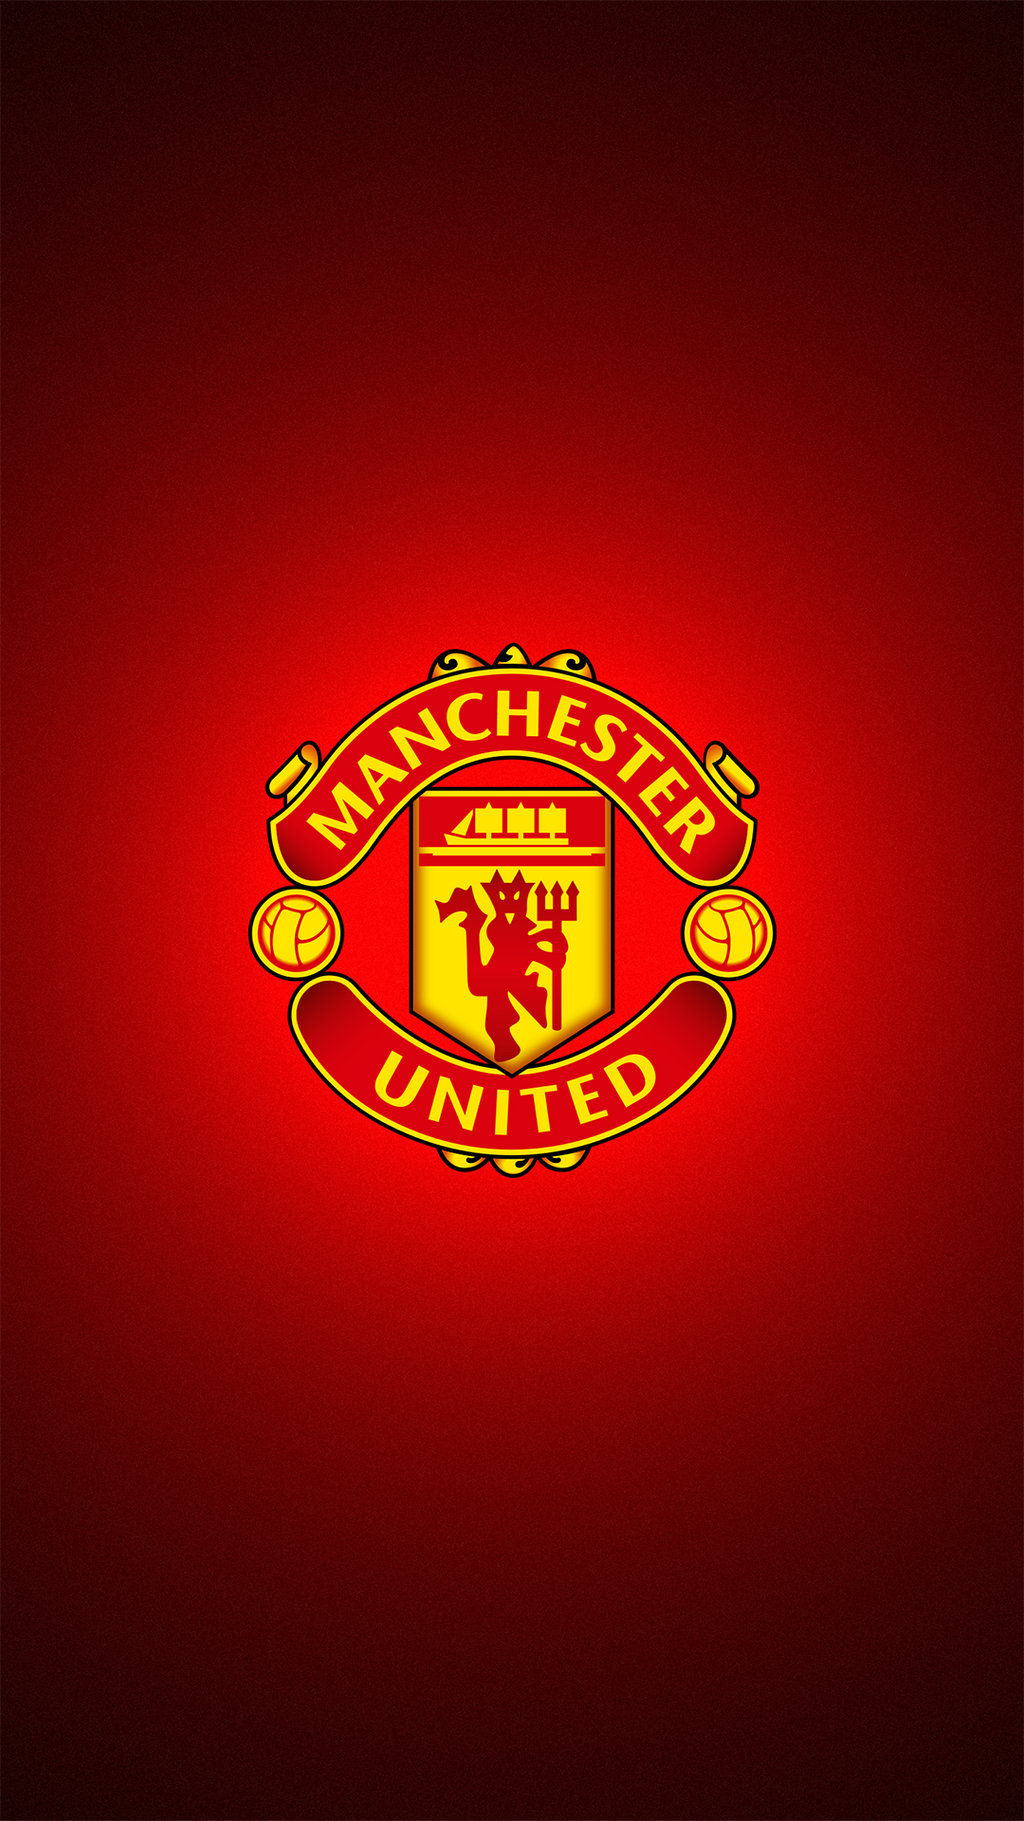 Fc Manchester United Wallpapers Iphone 6s By Lirking20 On Deviantart